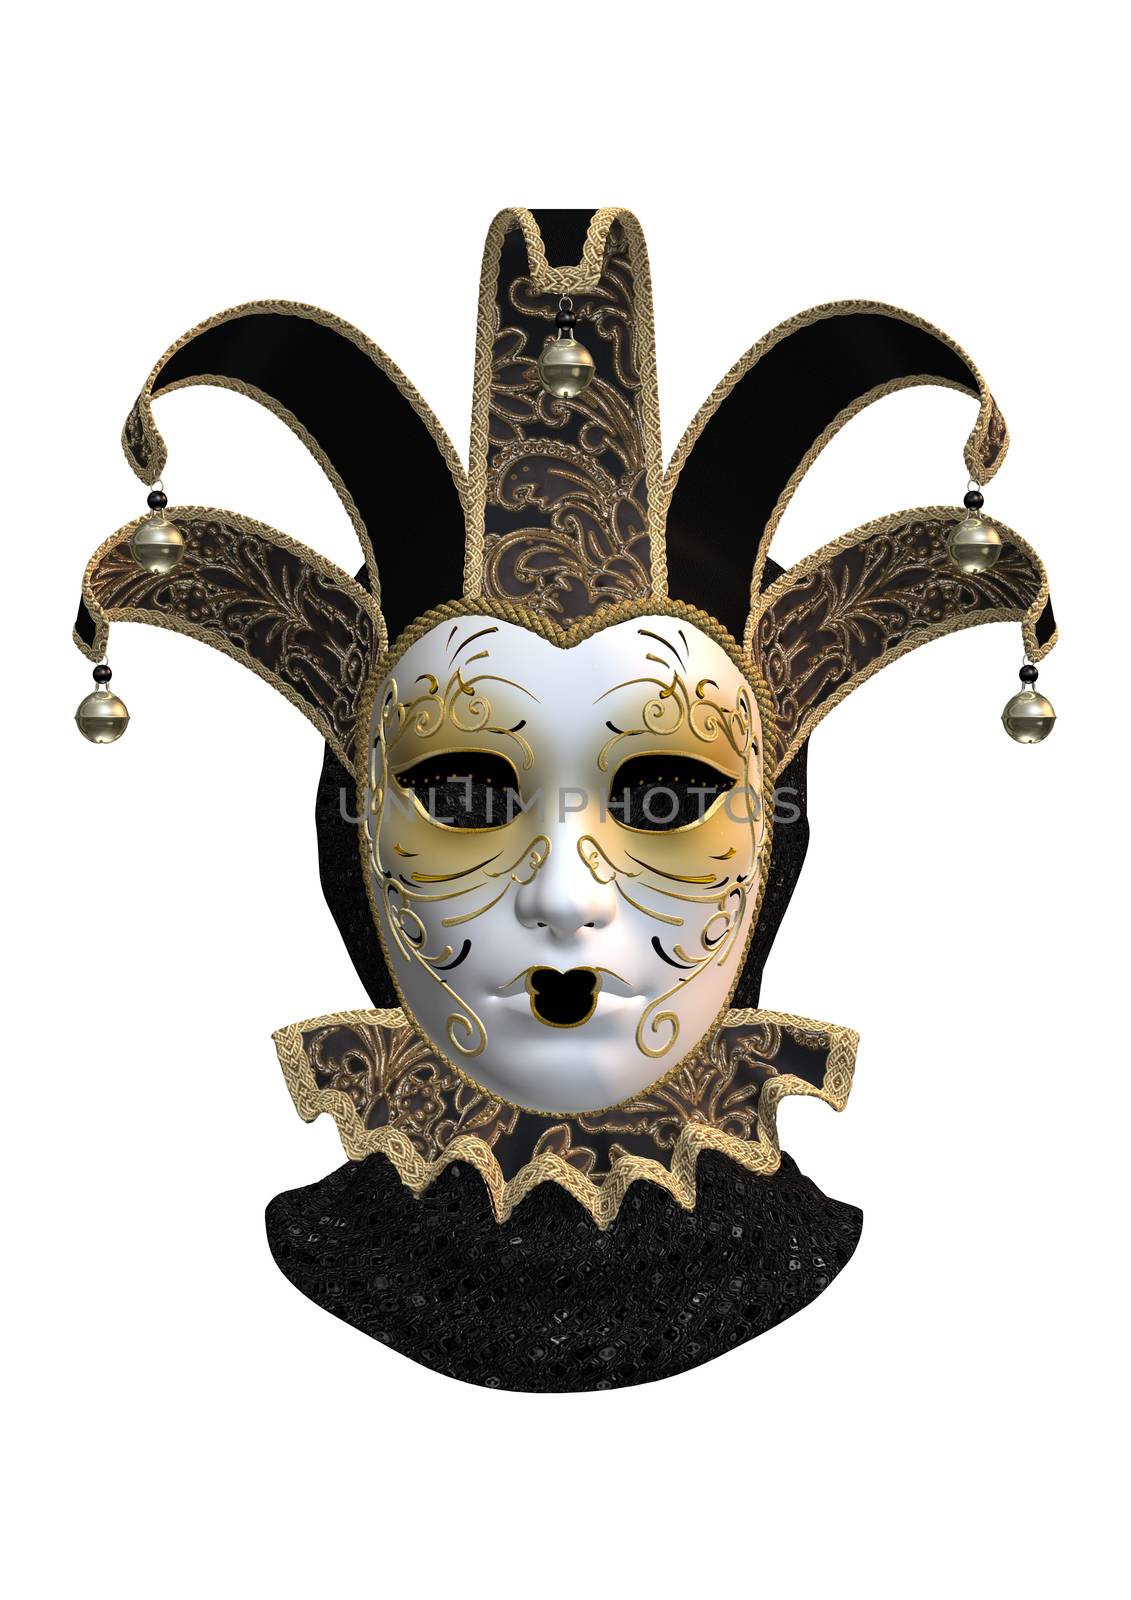 3D digital render of a Venetian mask isolated on white background